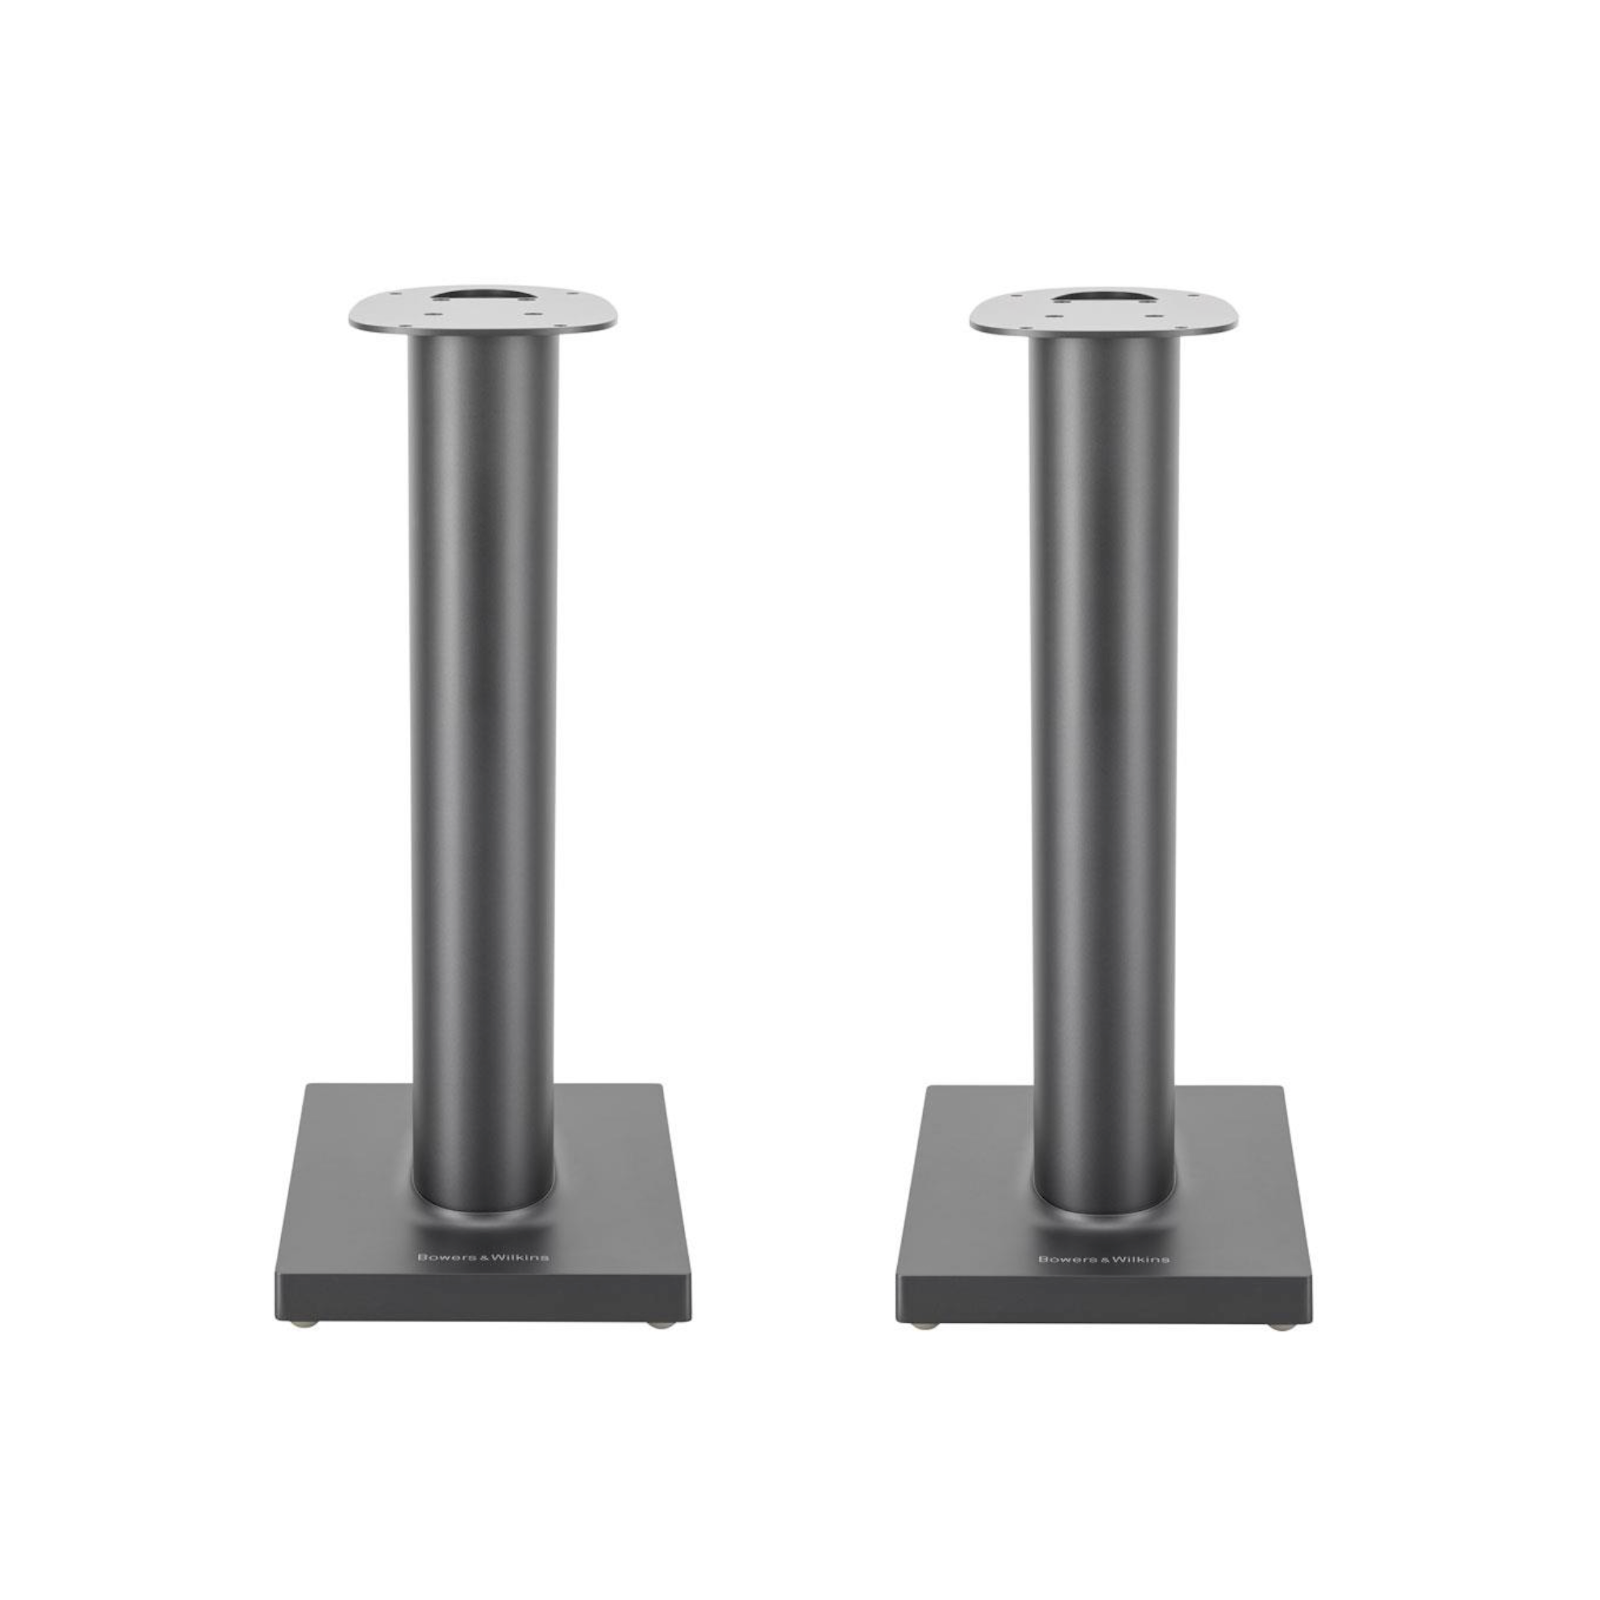 Bowers & Wilkins Formations Duo FS - Floorstand Pair